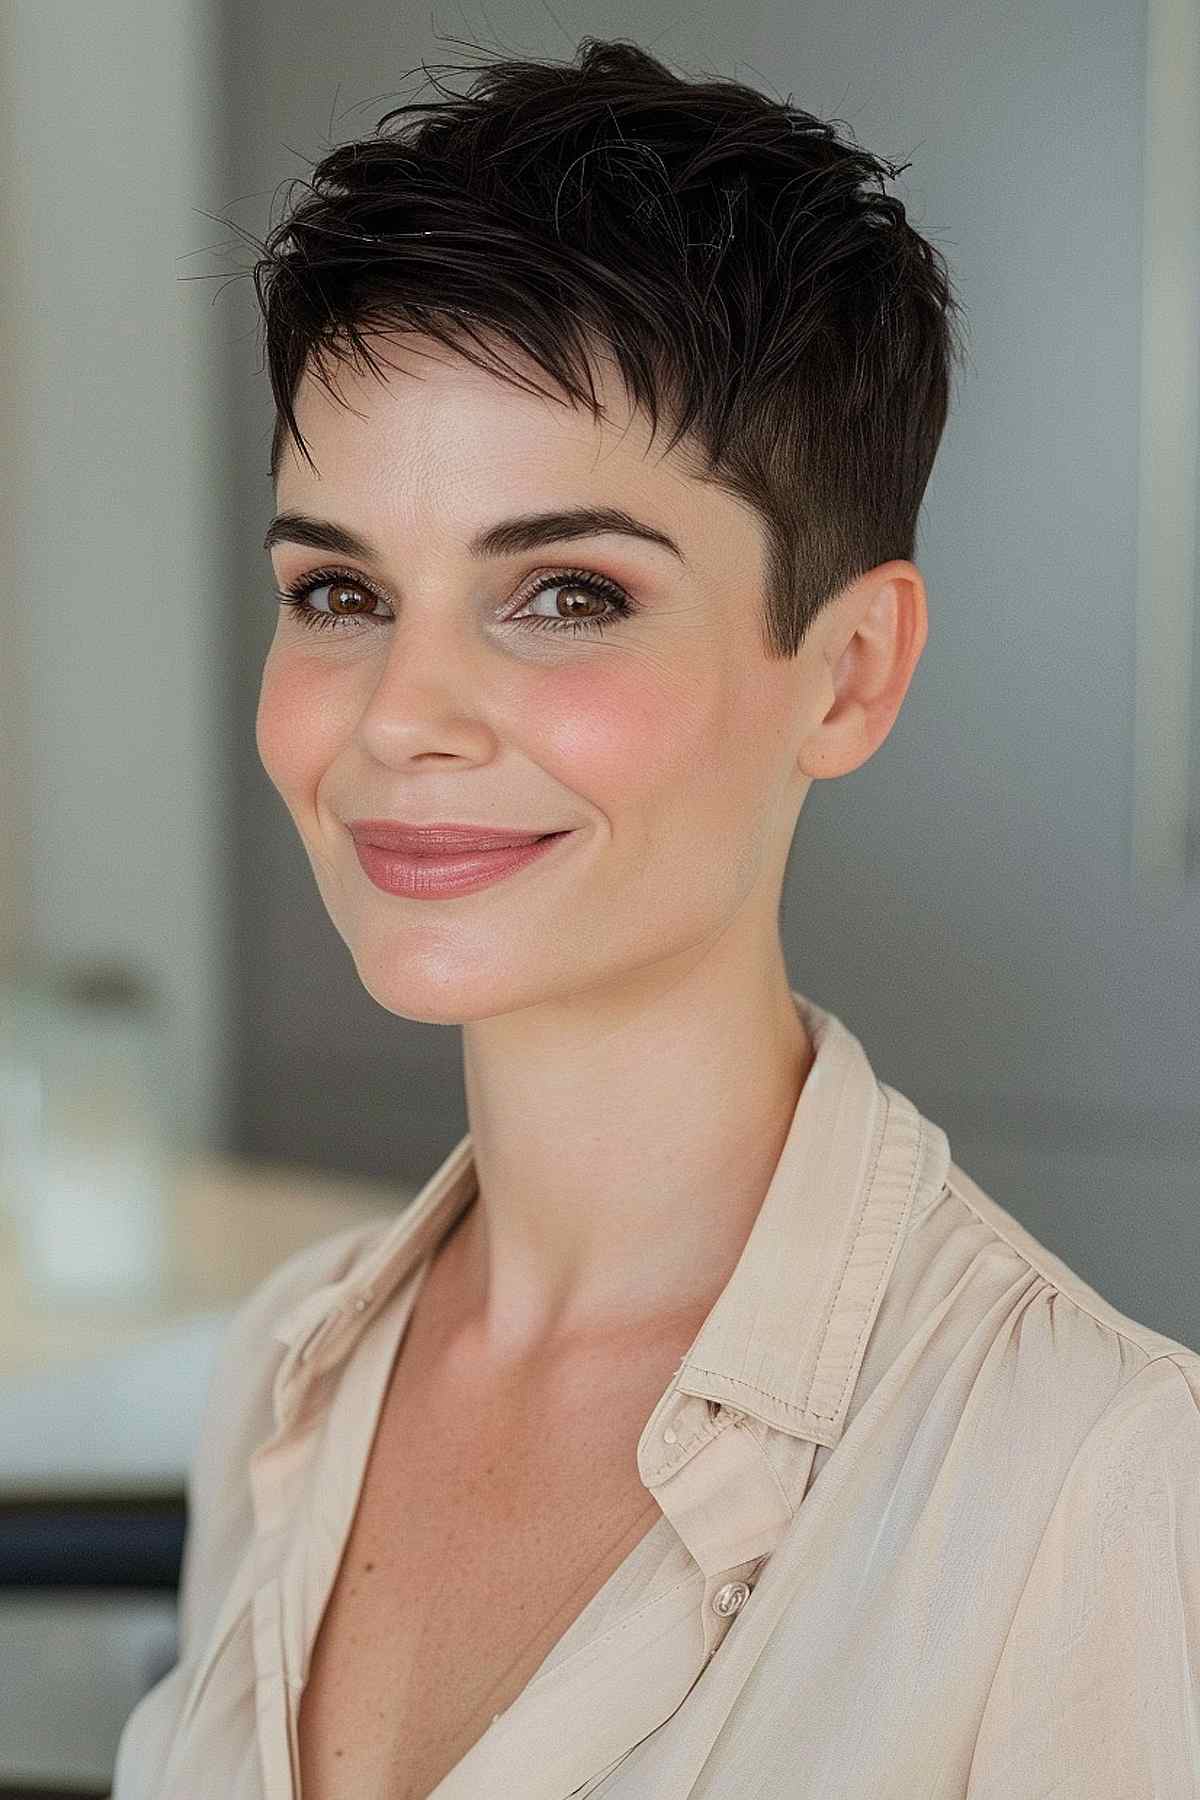 Woman with short feathered pixie cut and styled bangs, ideal for enhancing facial symmetry and highlighting delicate features.